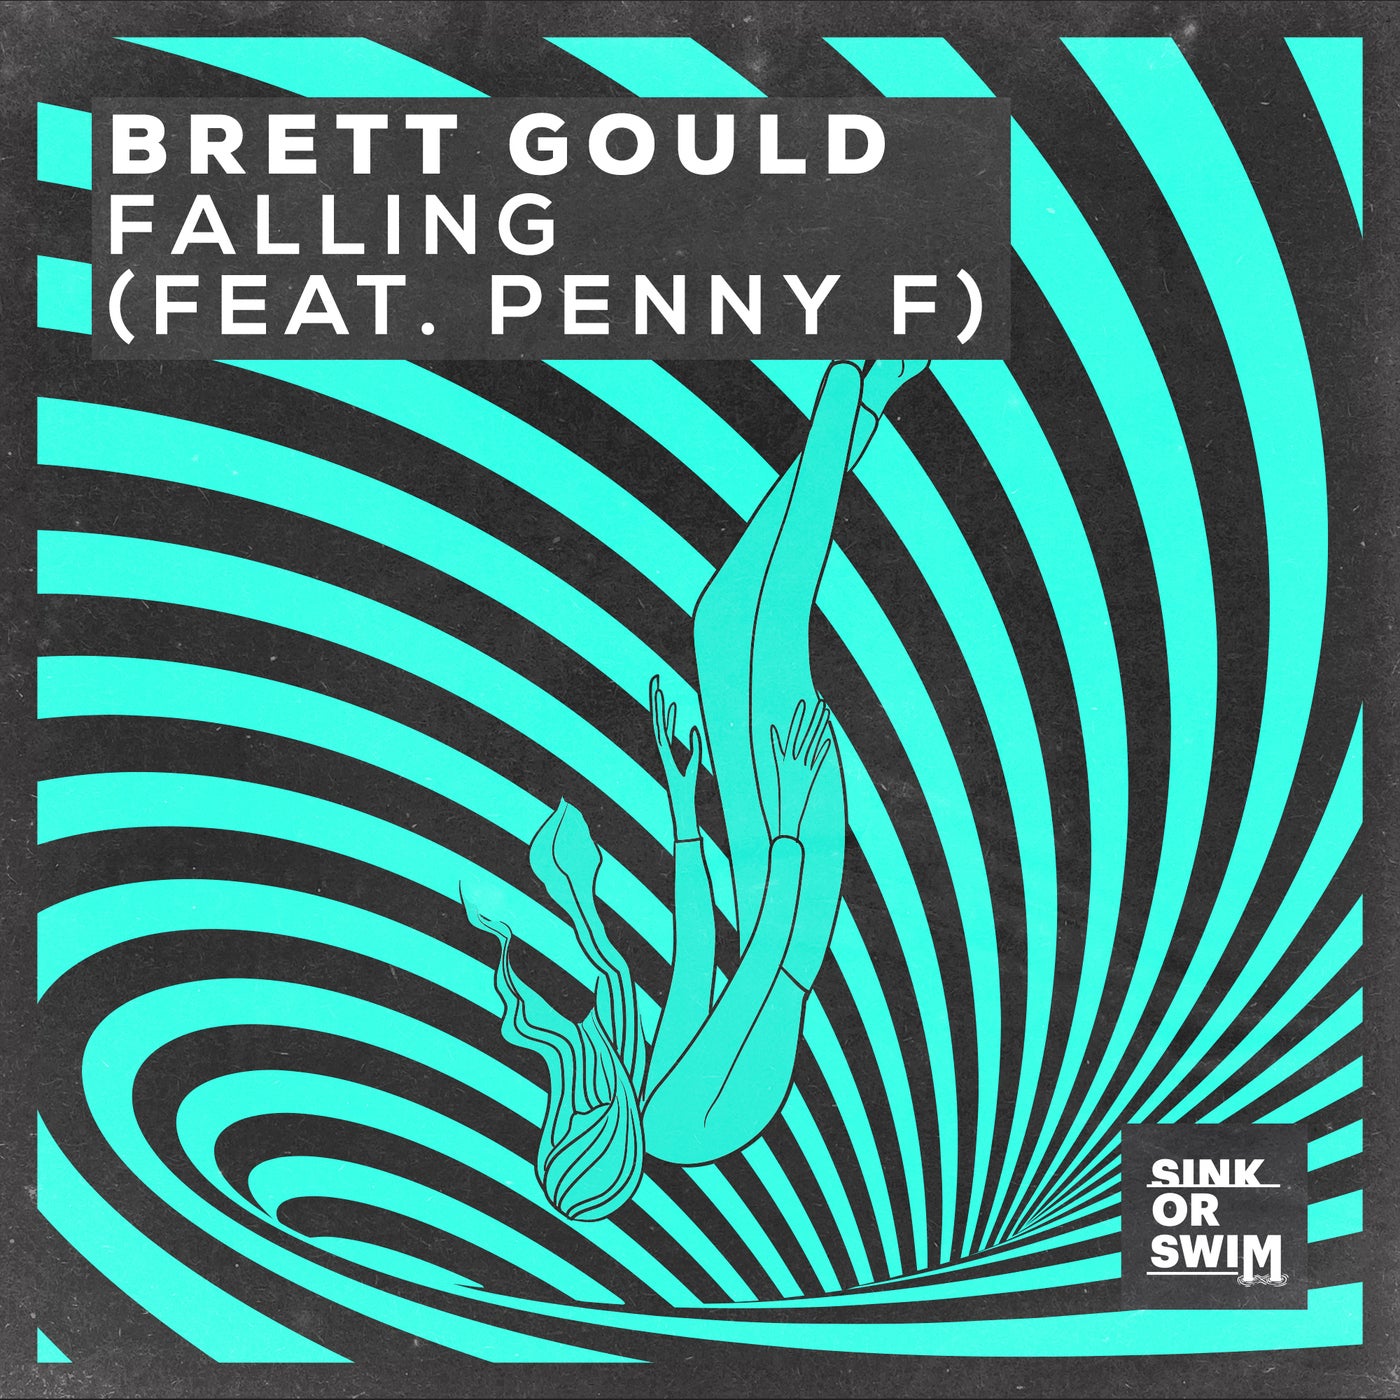 Download Brett Gould, Penny F. - Falling feat. Penny F. [Extended Mix] on Electrobuzz